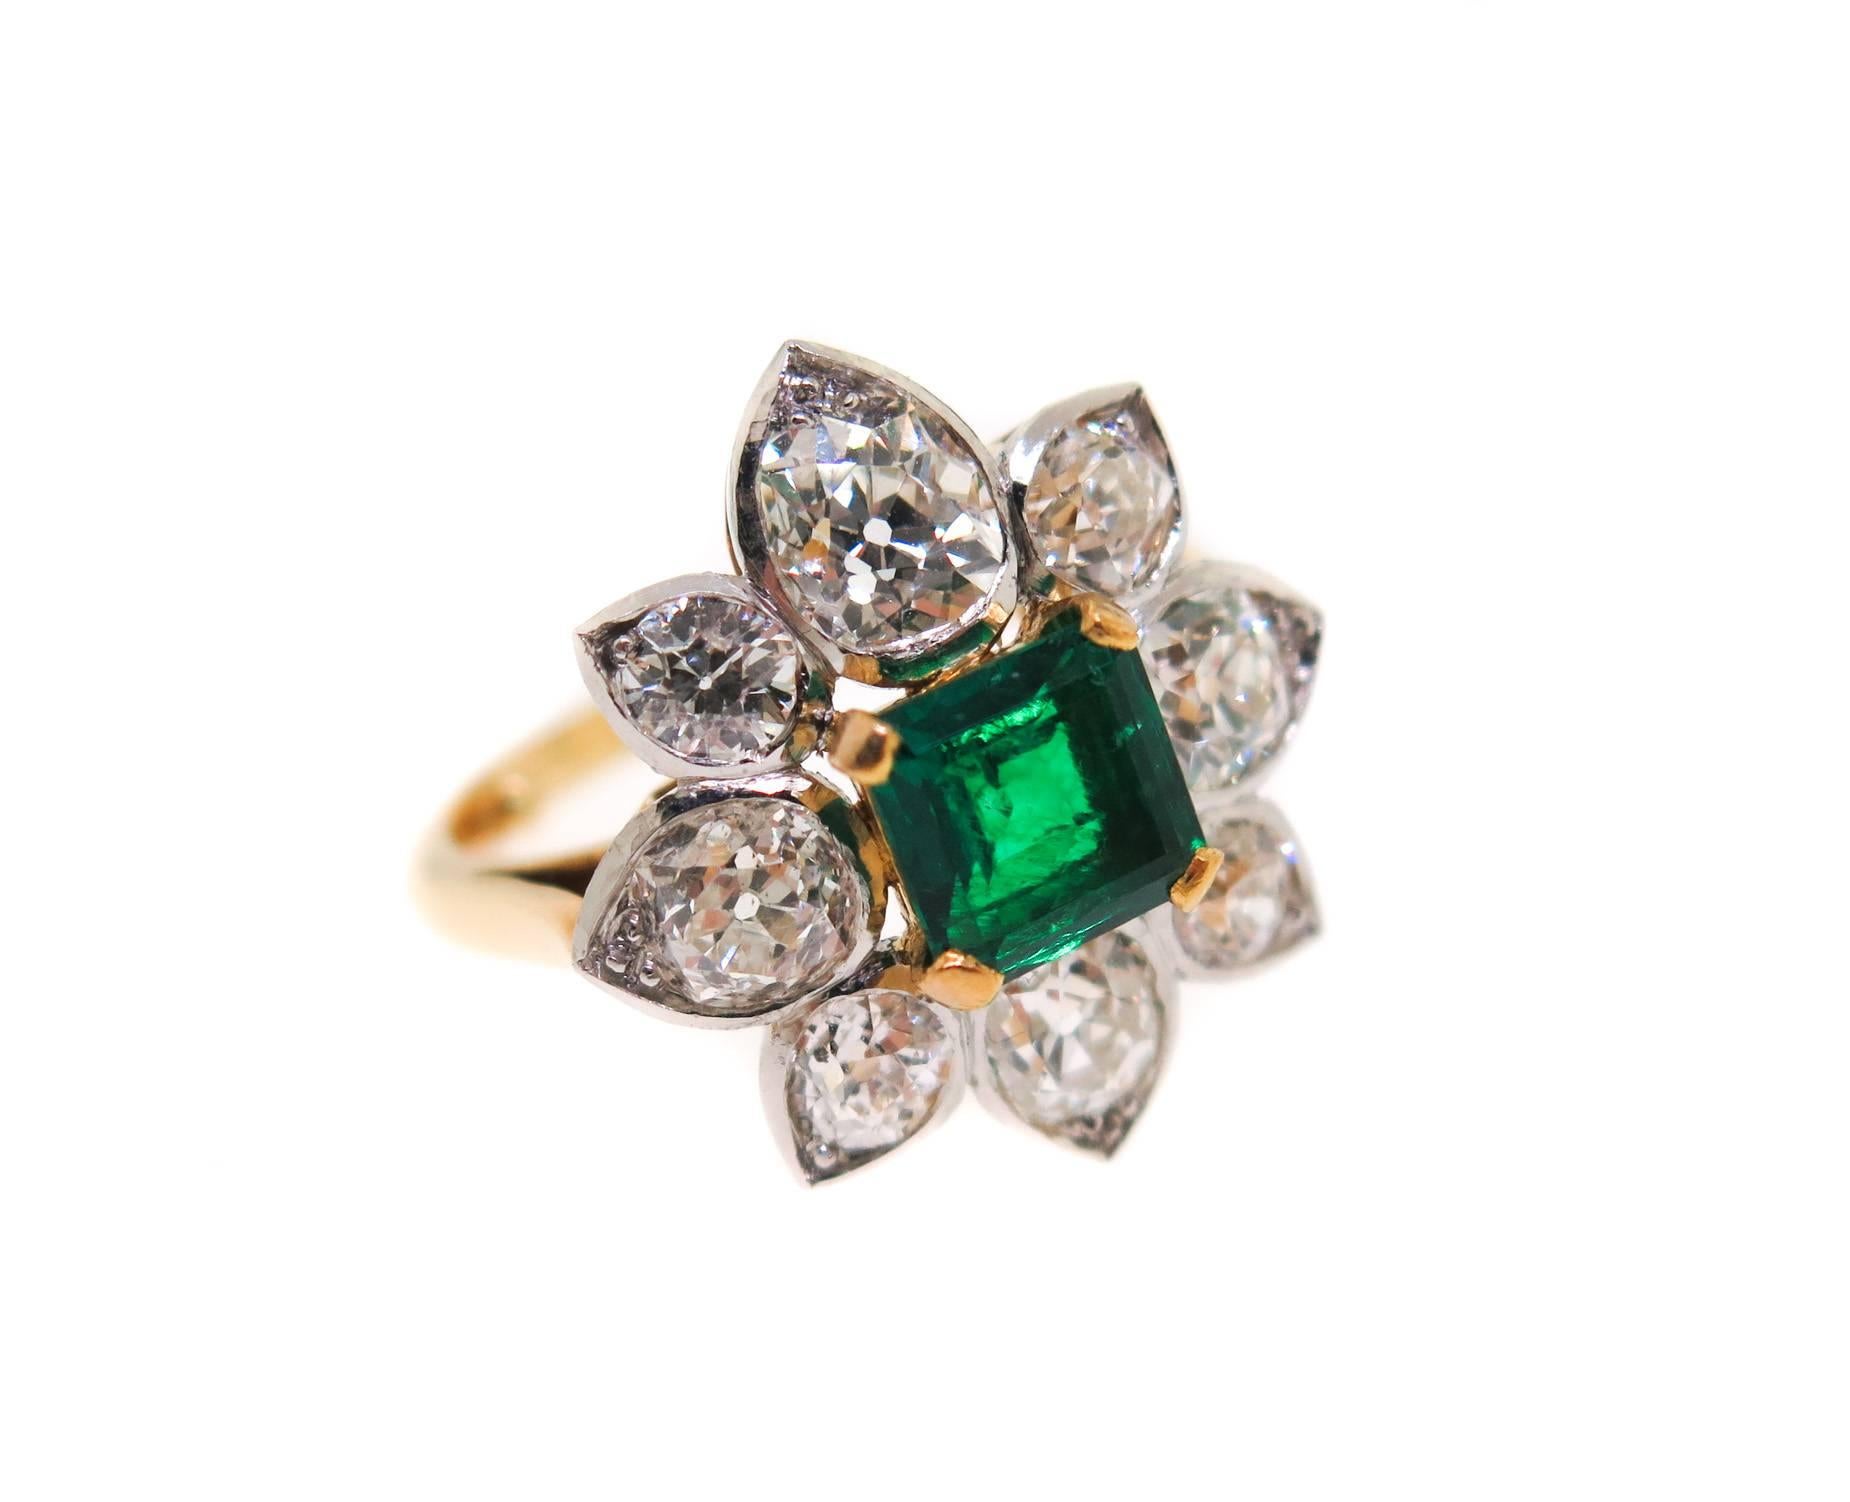 A gorgeous ring, centered with a very fine princess-cut emerald (6.5 mm, approximately 1.50 carats) surrounded by a cluster of 8 old european cut diamonds. Estimated total diamond weight is approximately 2.50 carats. Crafted in 18K yellow gold and